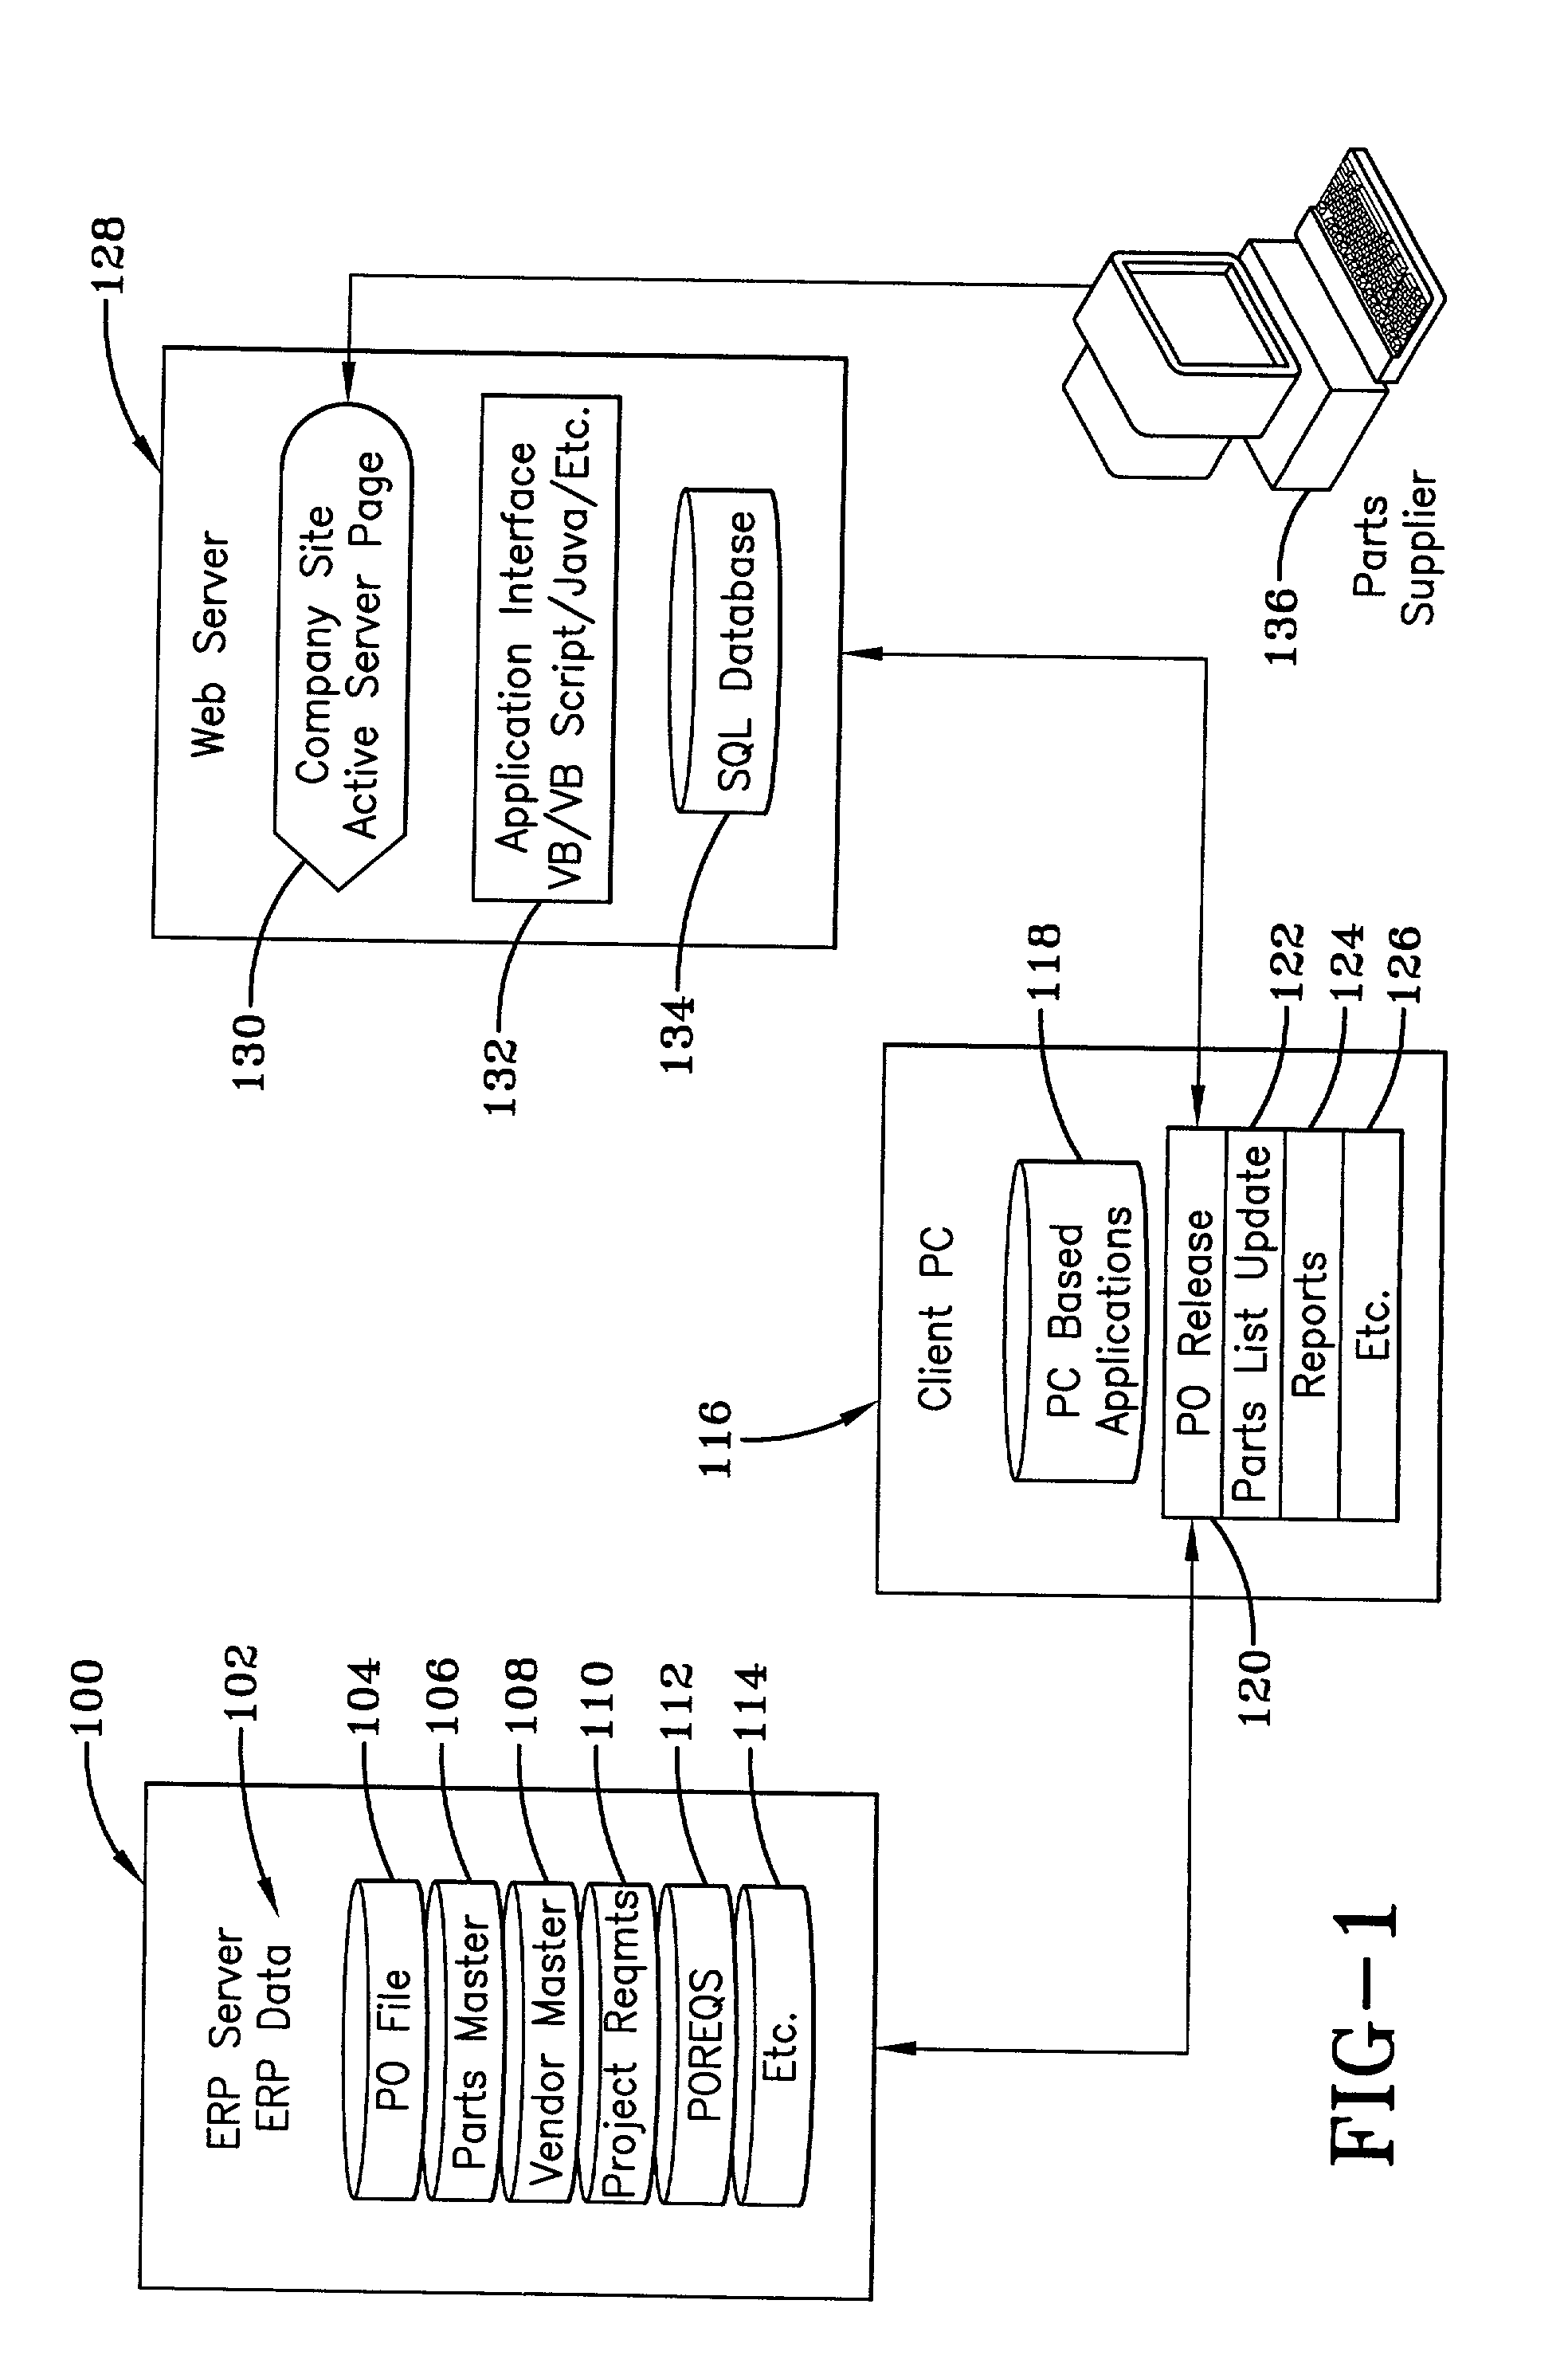 System and method for procurement of products